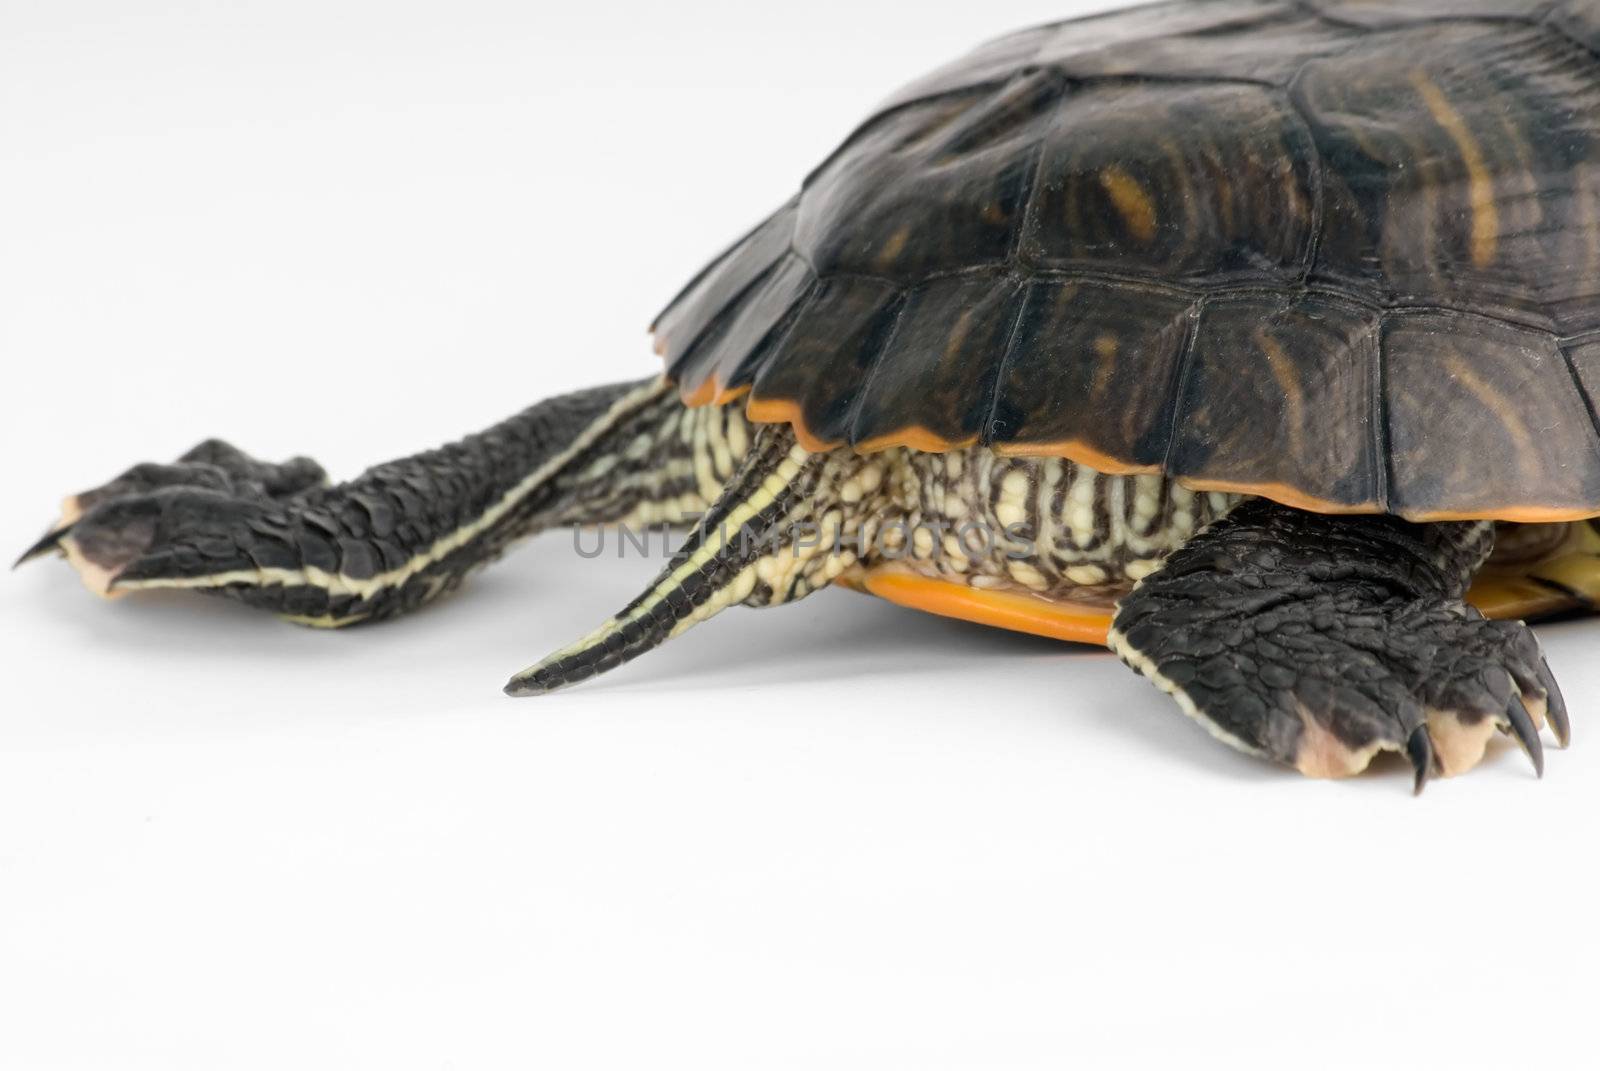 Turtle on a white background. See more in my portfolio